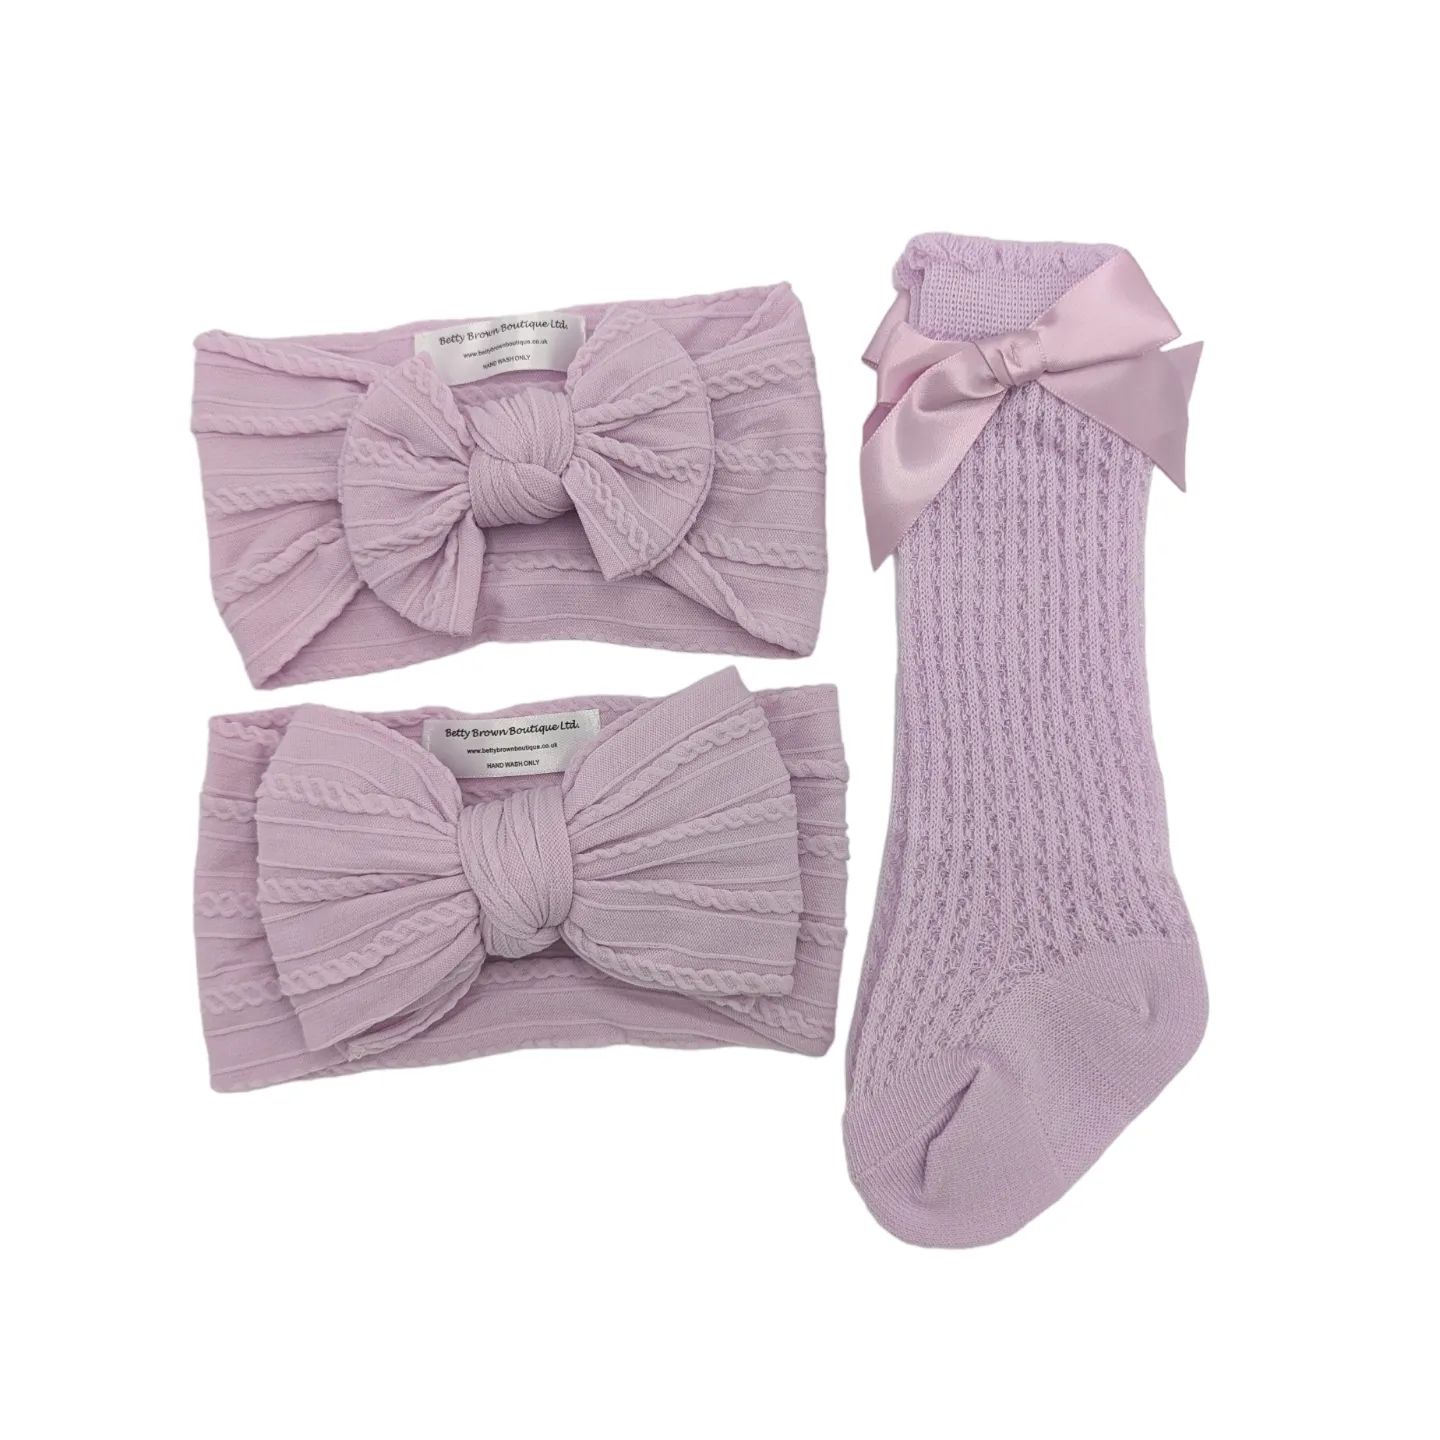 Our Bright Lilac Larger, Smaller Headwrap & Knee High Socks Set - Betty Brown Boutique Ltd